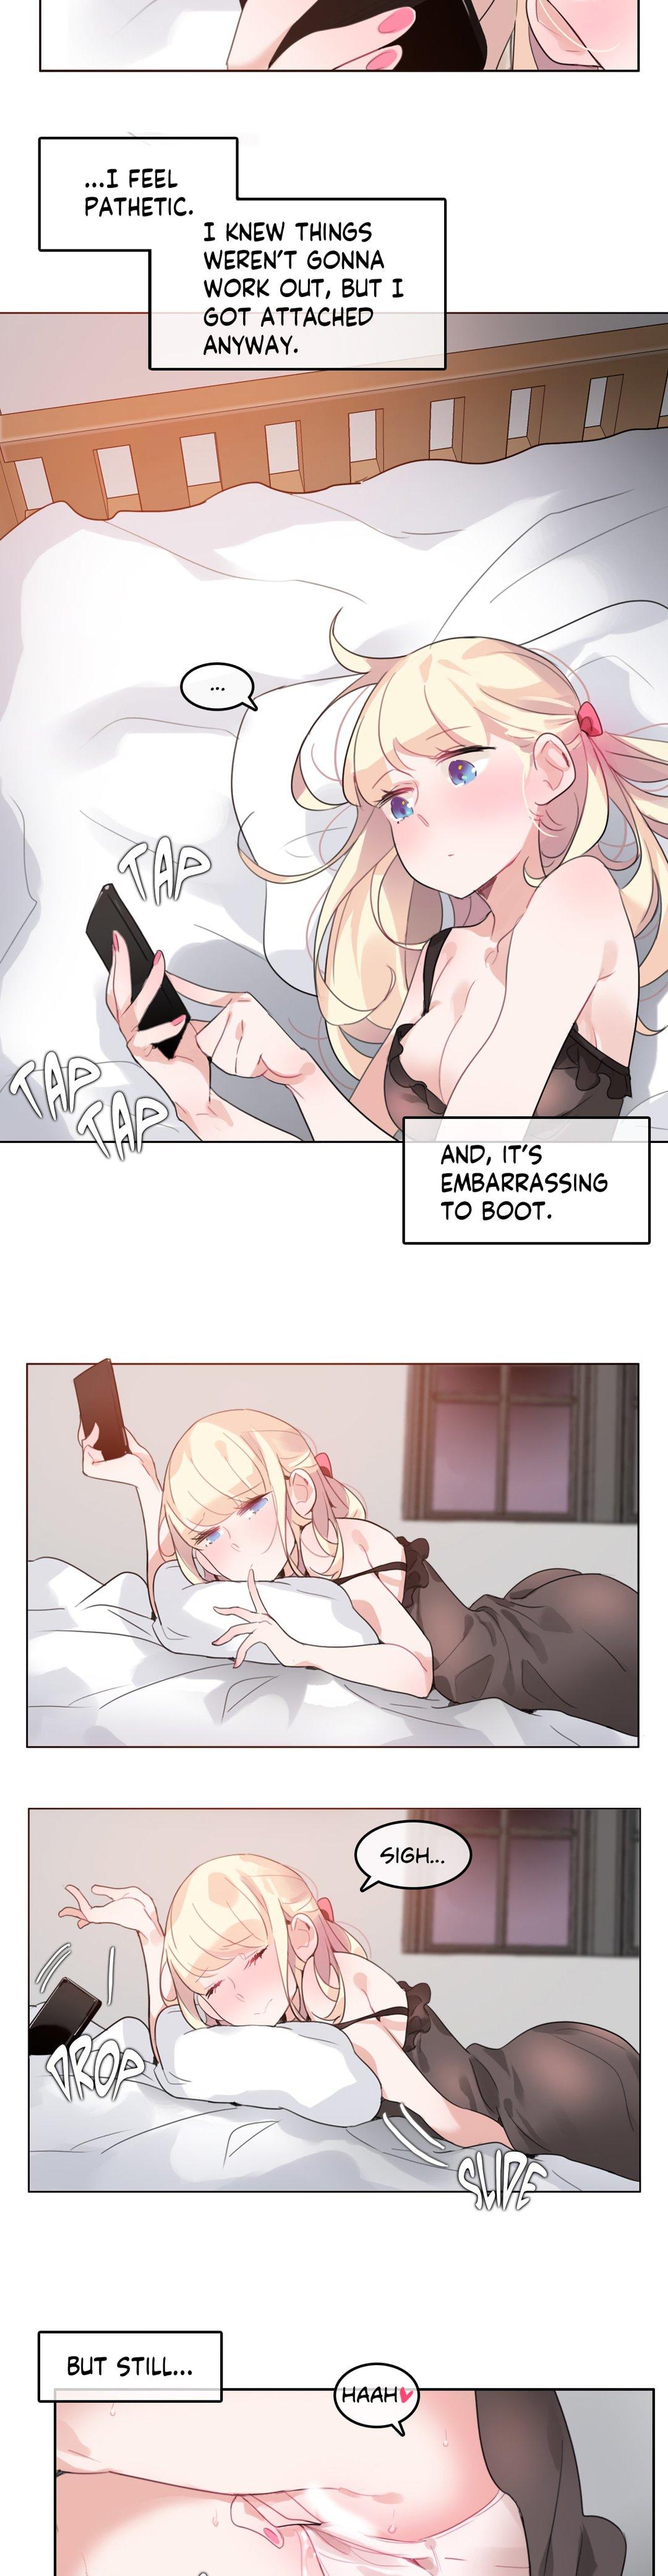 A Pervert's Daily Life • Chapter 26-30 38